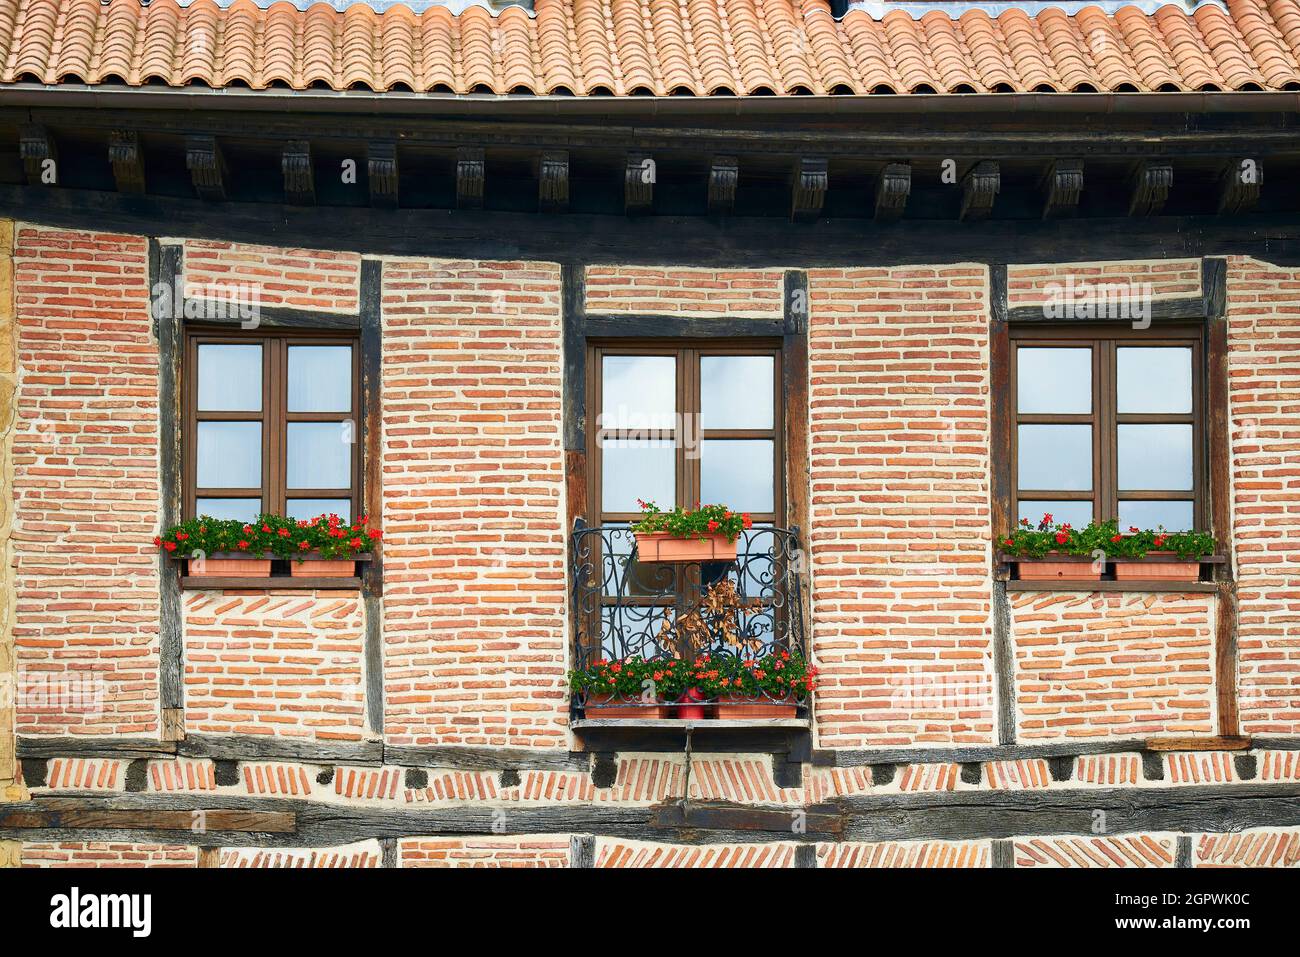 Ancient wooden building with red brick facade and flower pots in the windows and balcony Stock Photo